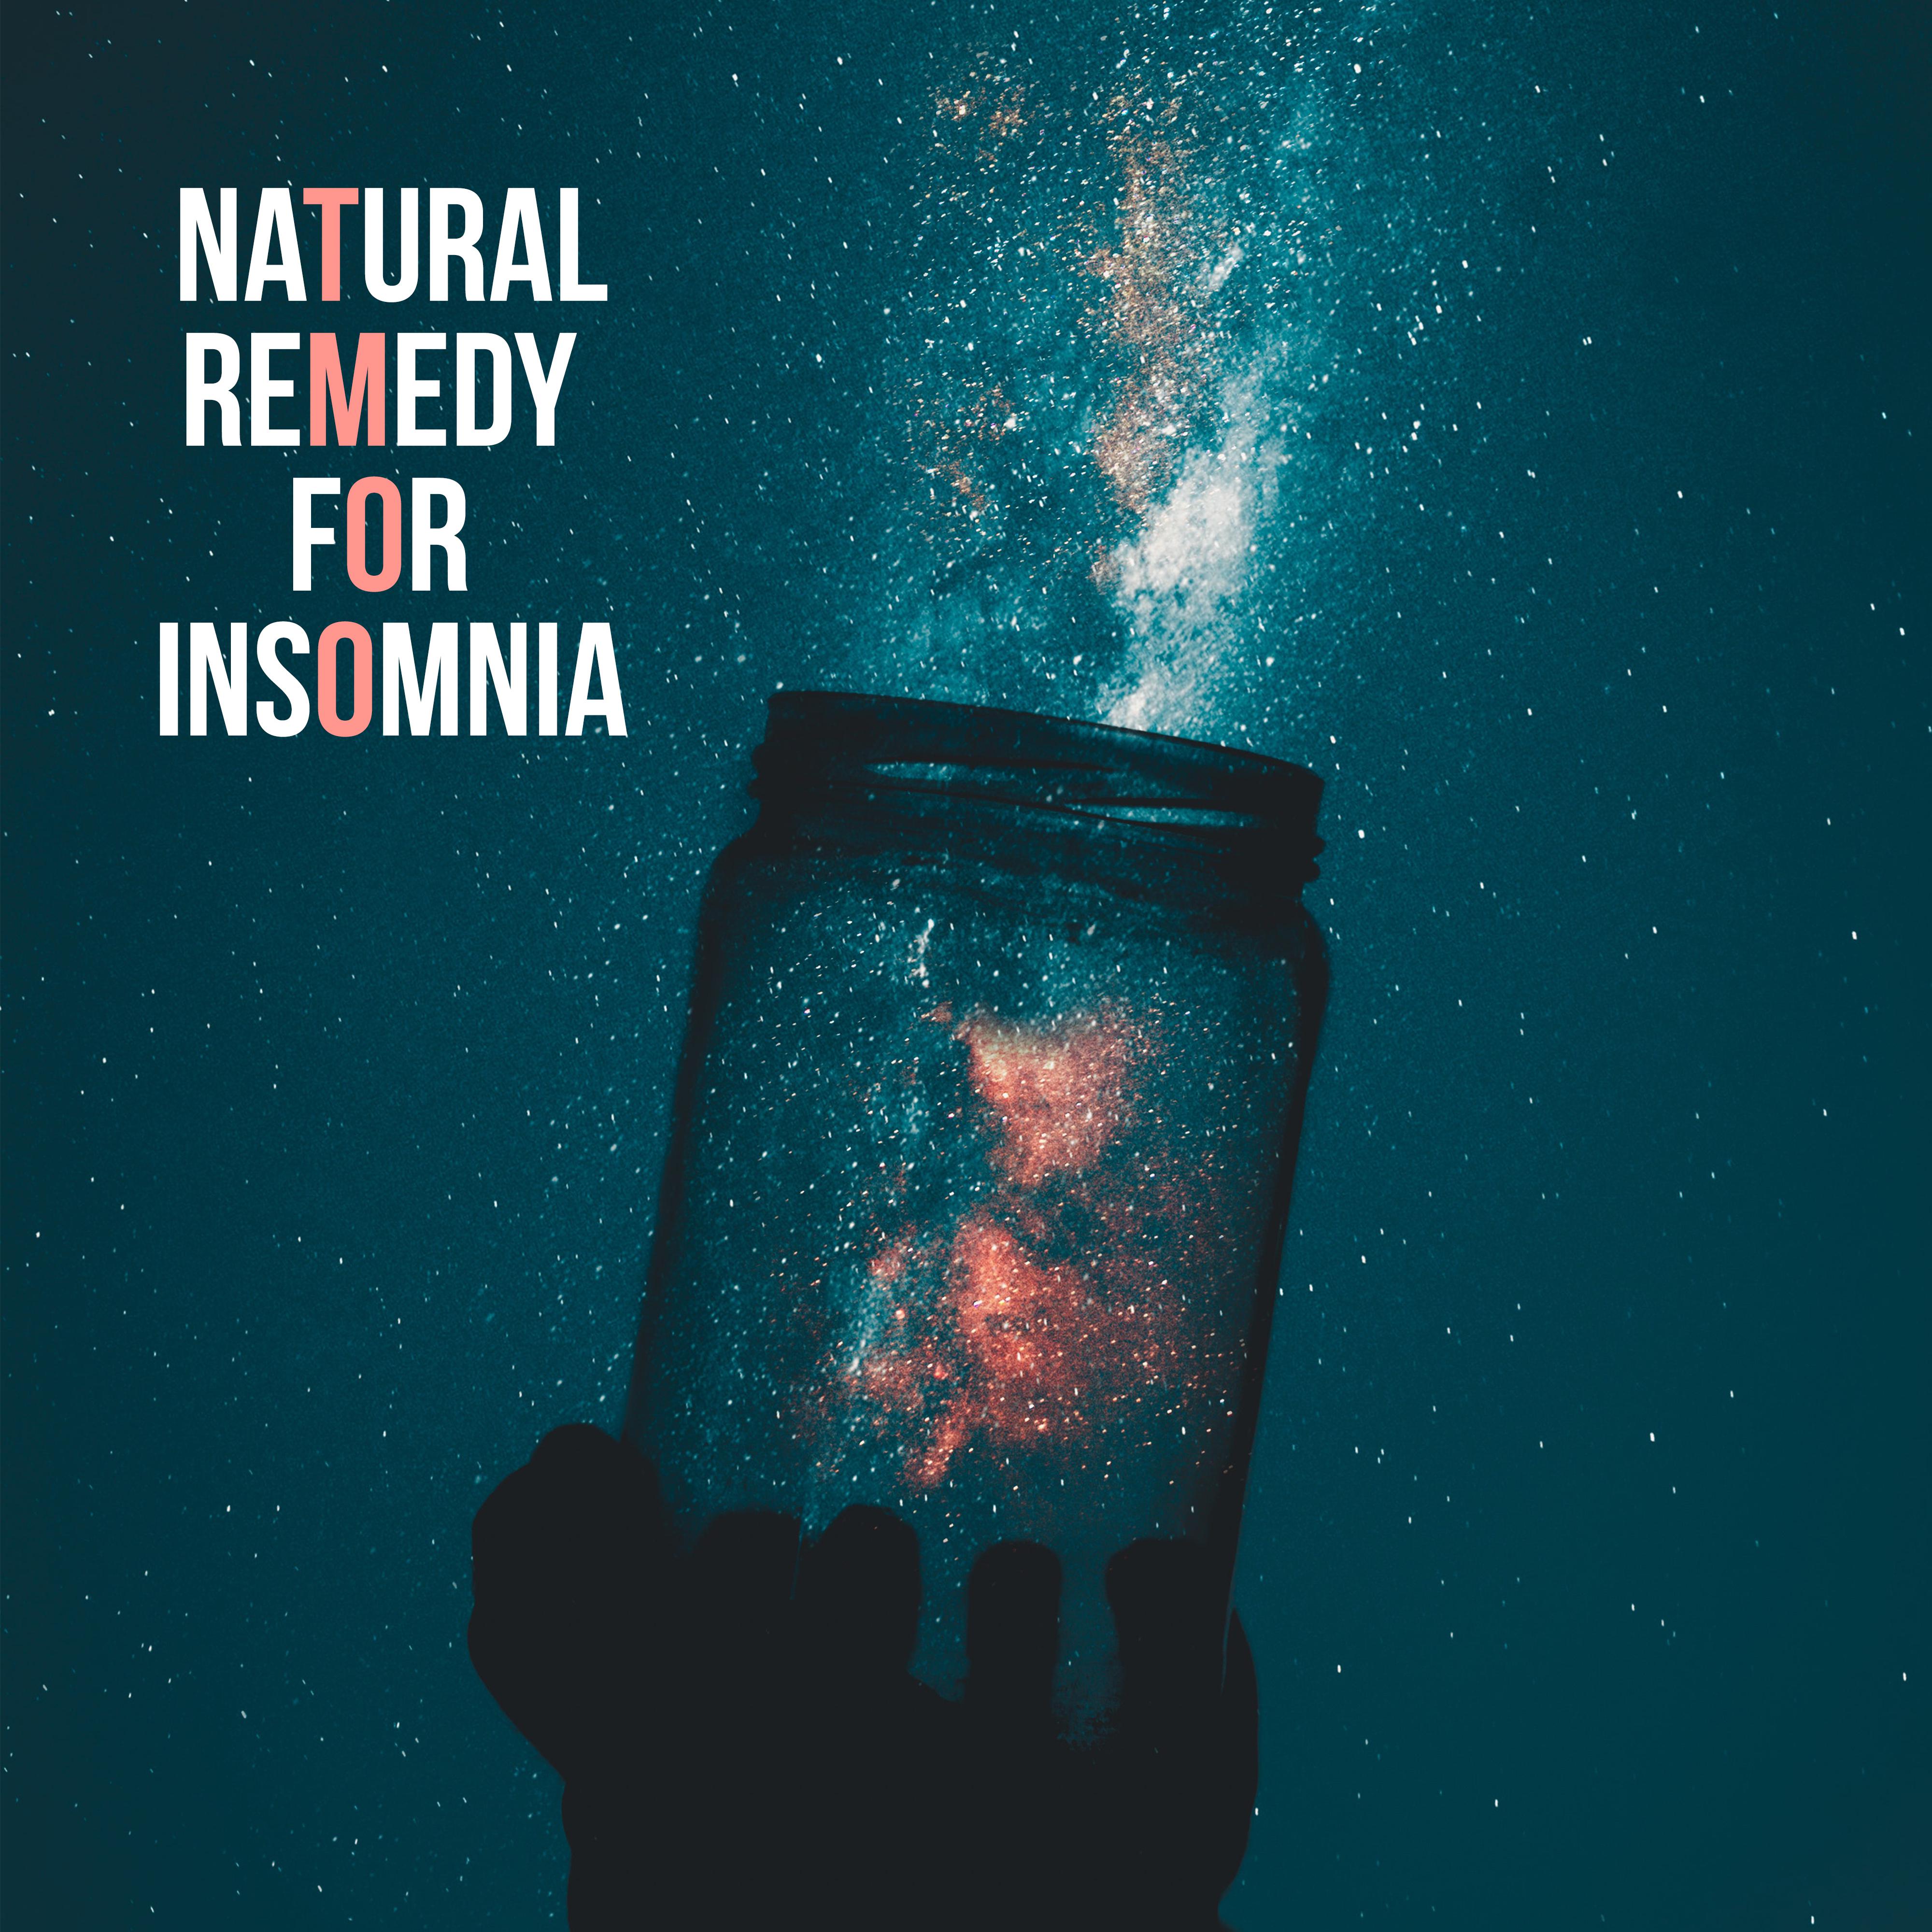 Natural Remedy for Insomnia: 15 Soothing and Gentle Melodies with Natural Soundscapes for Sleep Problems and Insomnia that Help You Fall Asleep Quickly and Stress Free